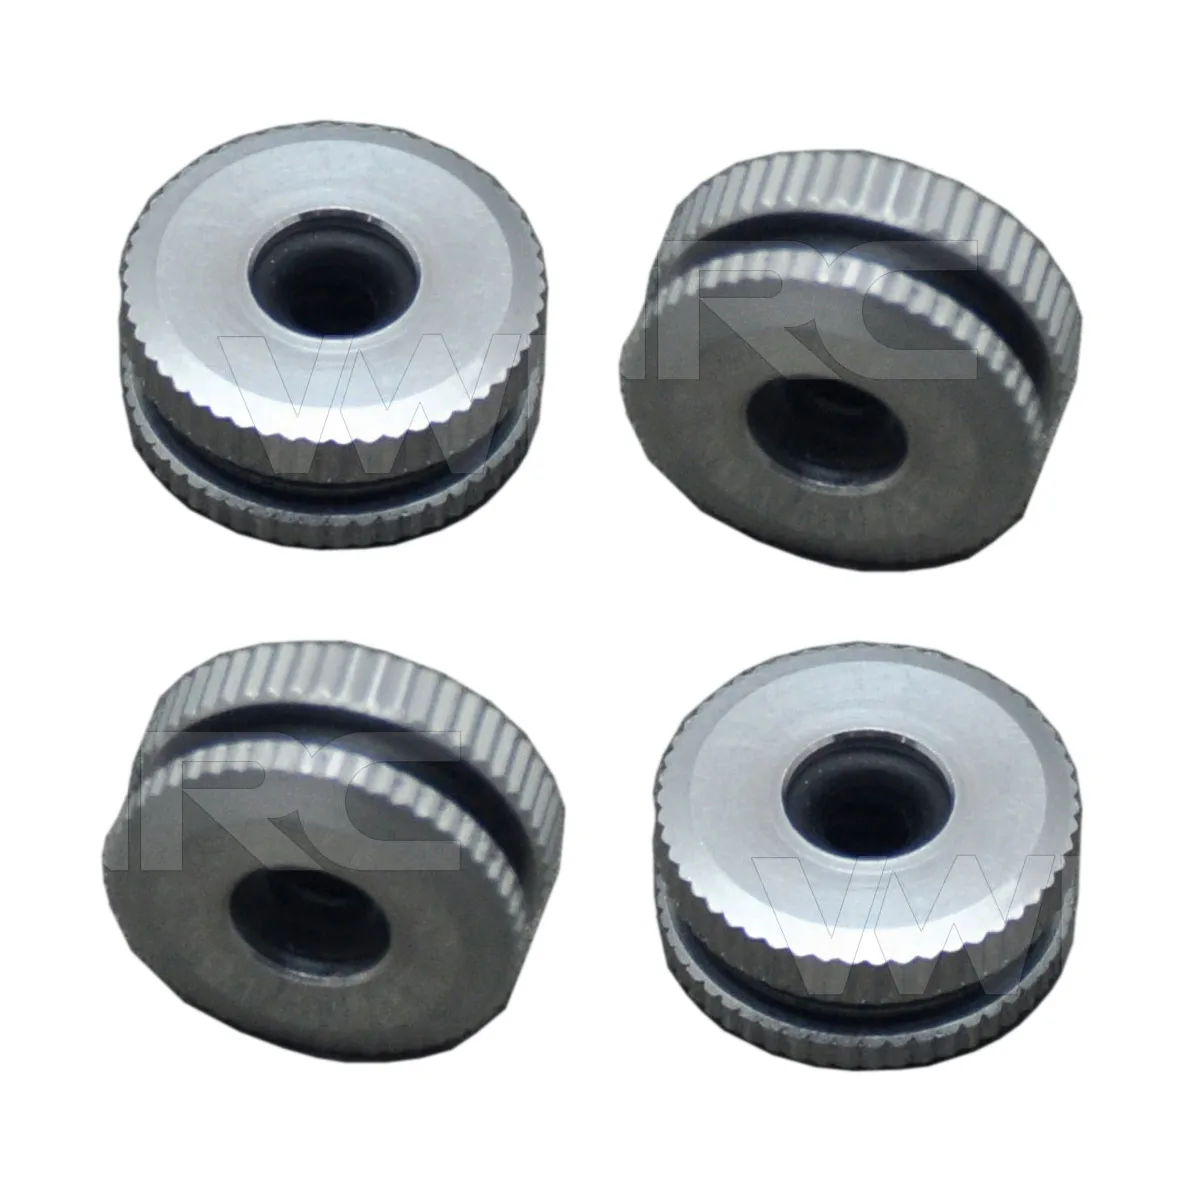 LMHS1279Bx40 500 Canopy Grommet Nuts for T-Rex Helicopter Black 40-Pcs 450 